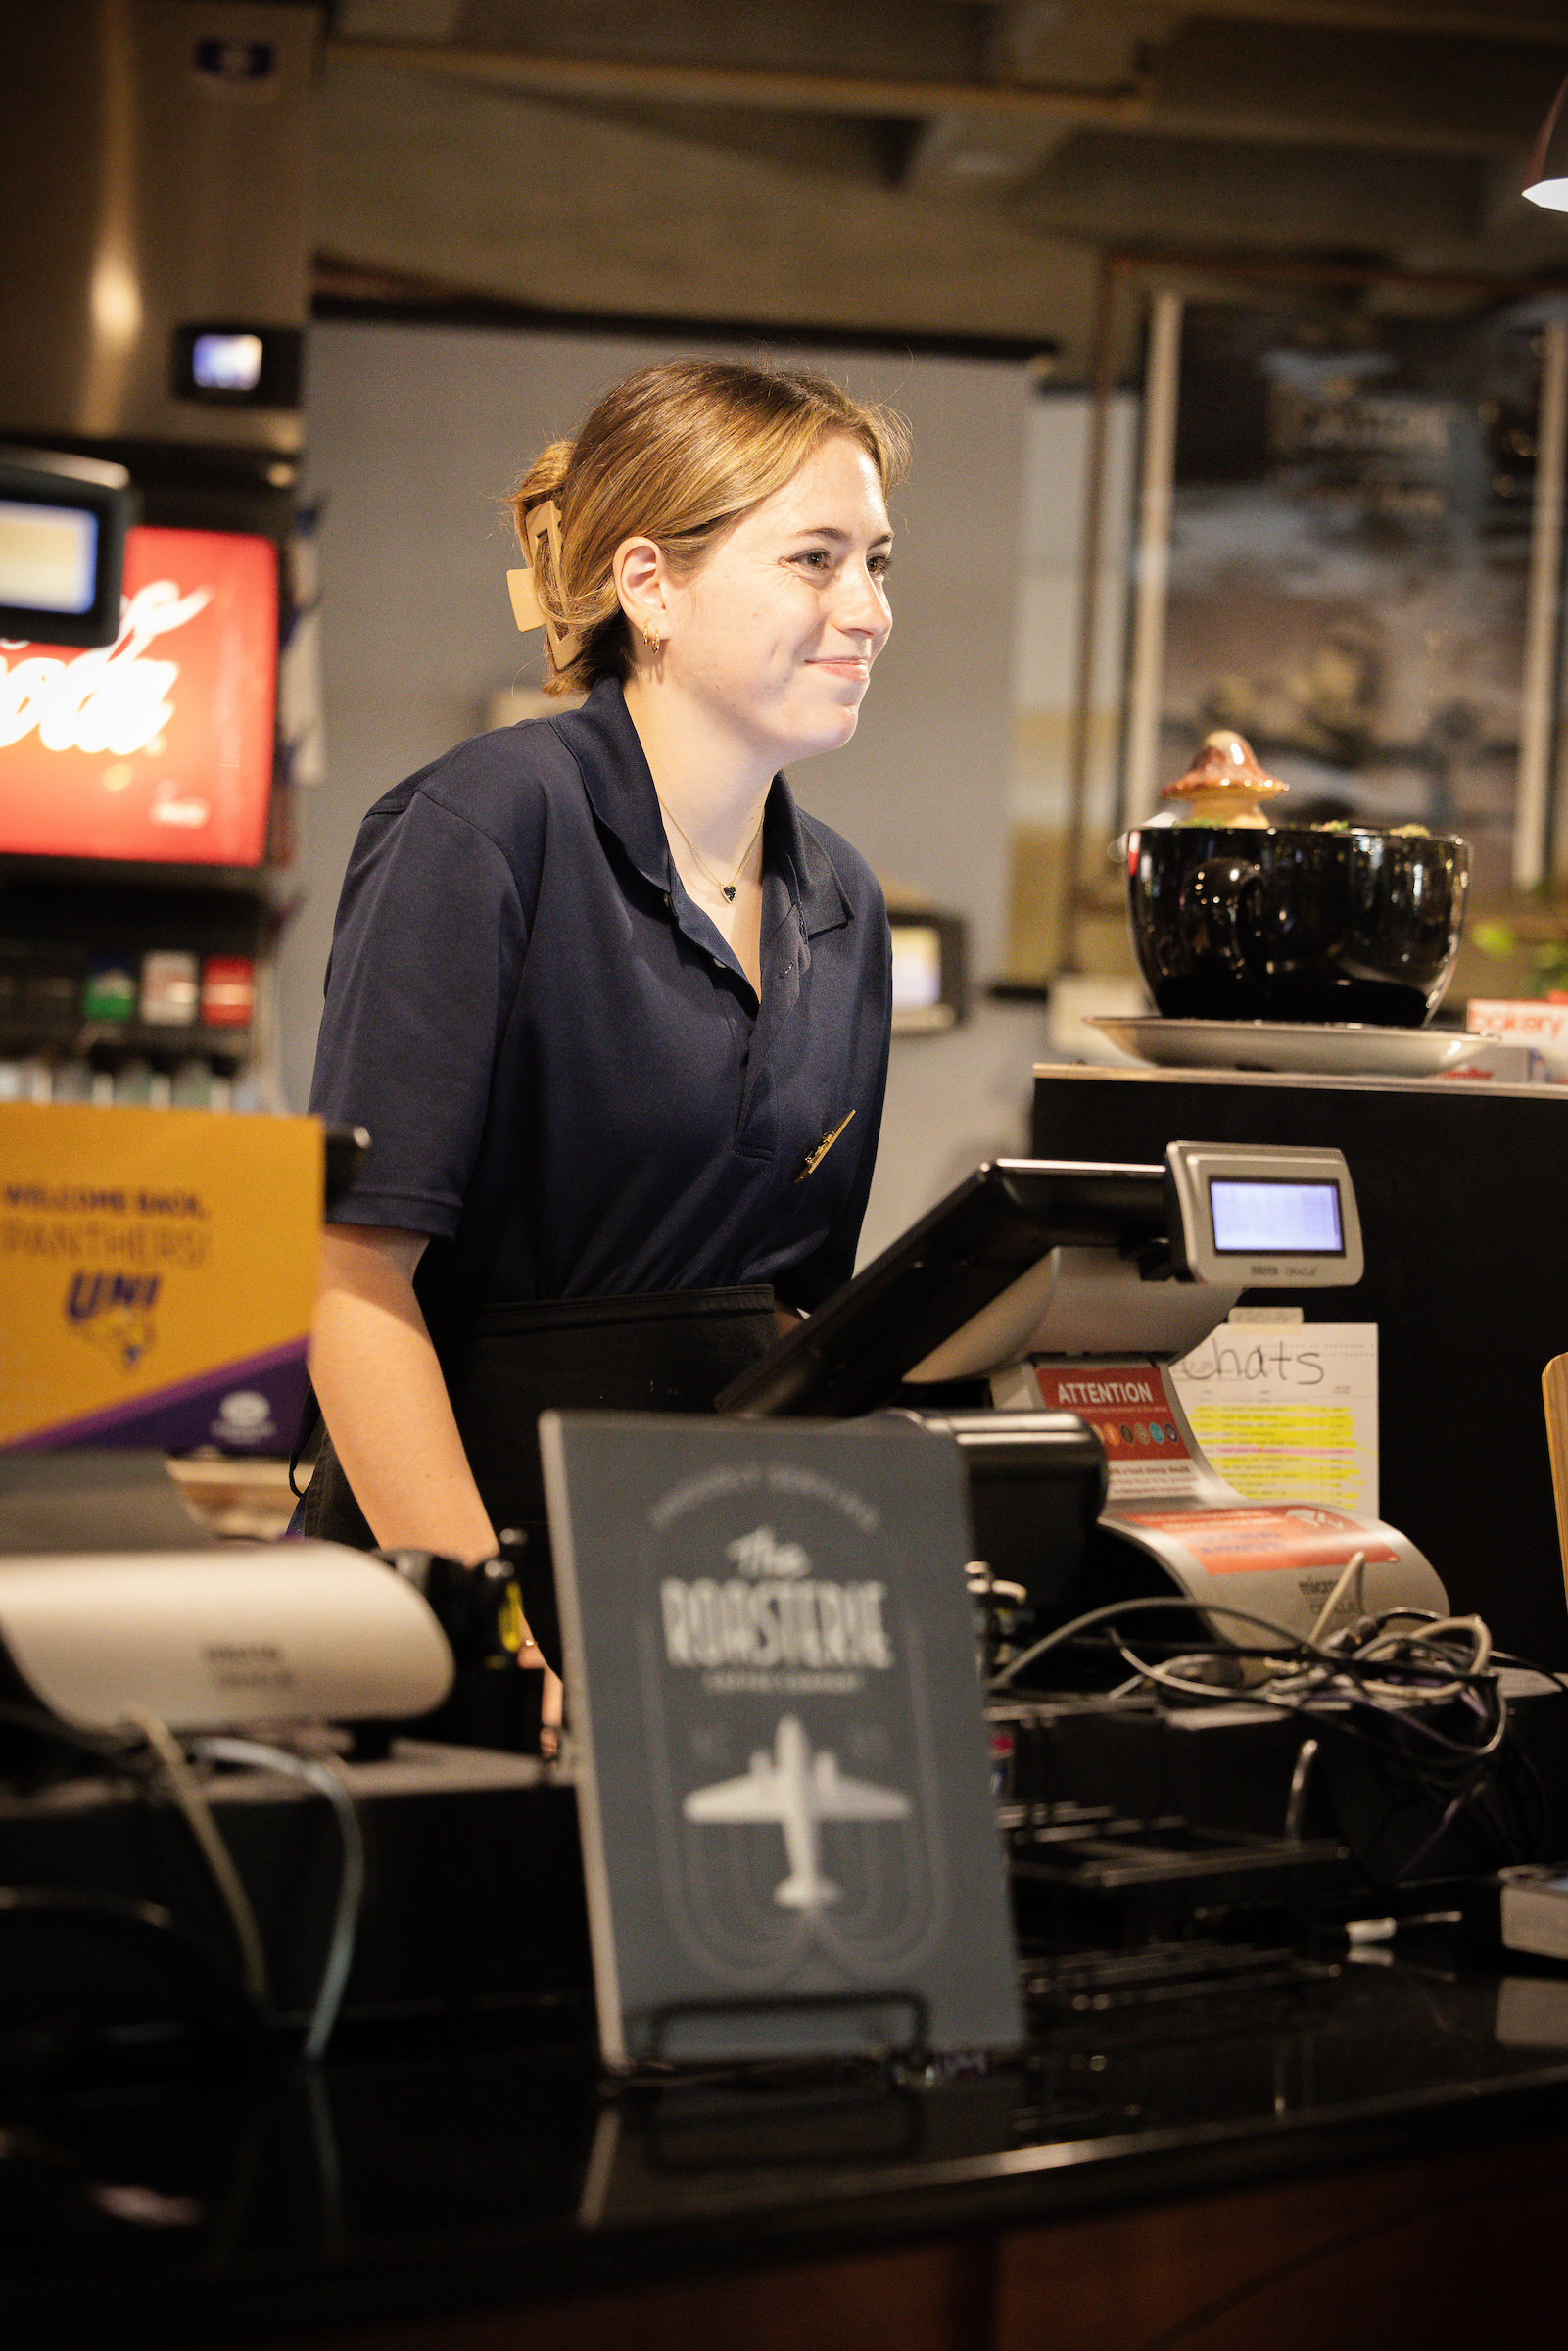 Student employee working at cash register